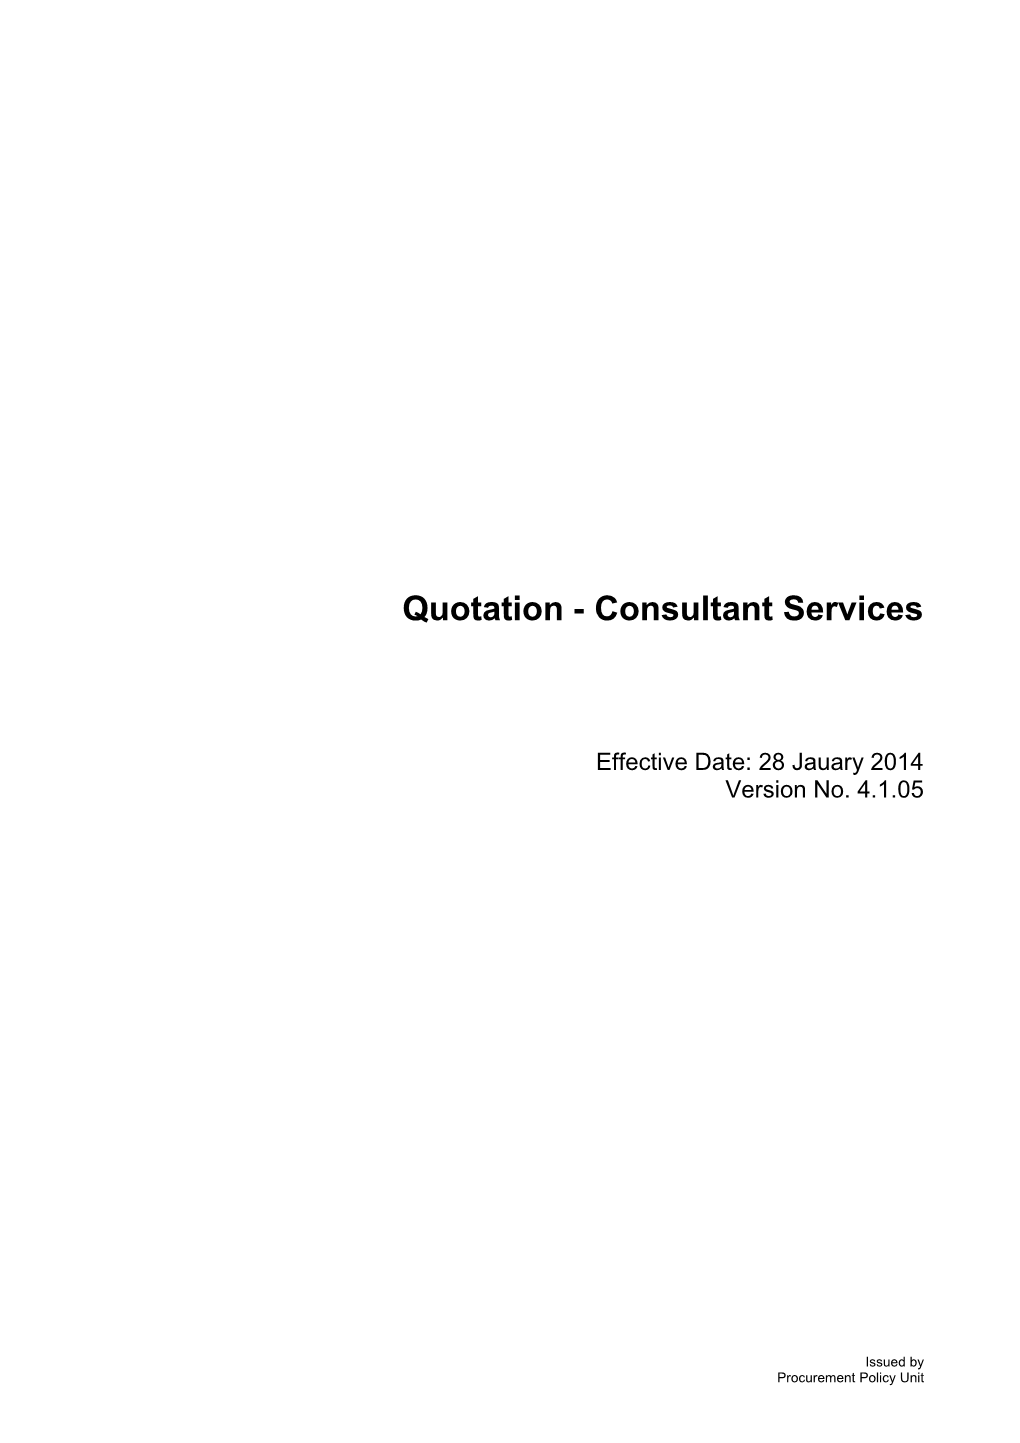 Quotation - Consultant Services - V 4.1.05 (28 Jauary 2014)